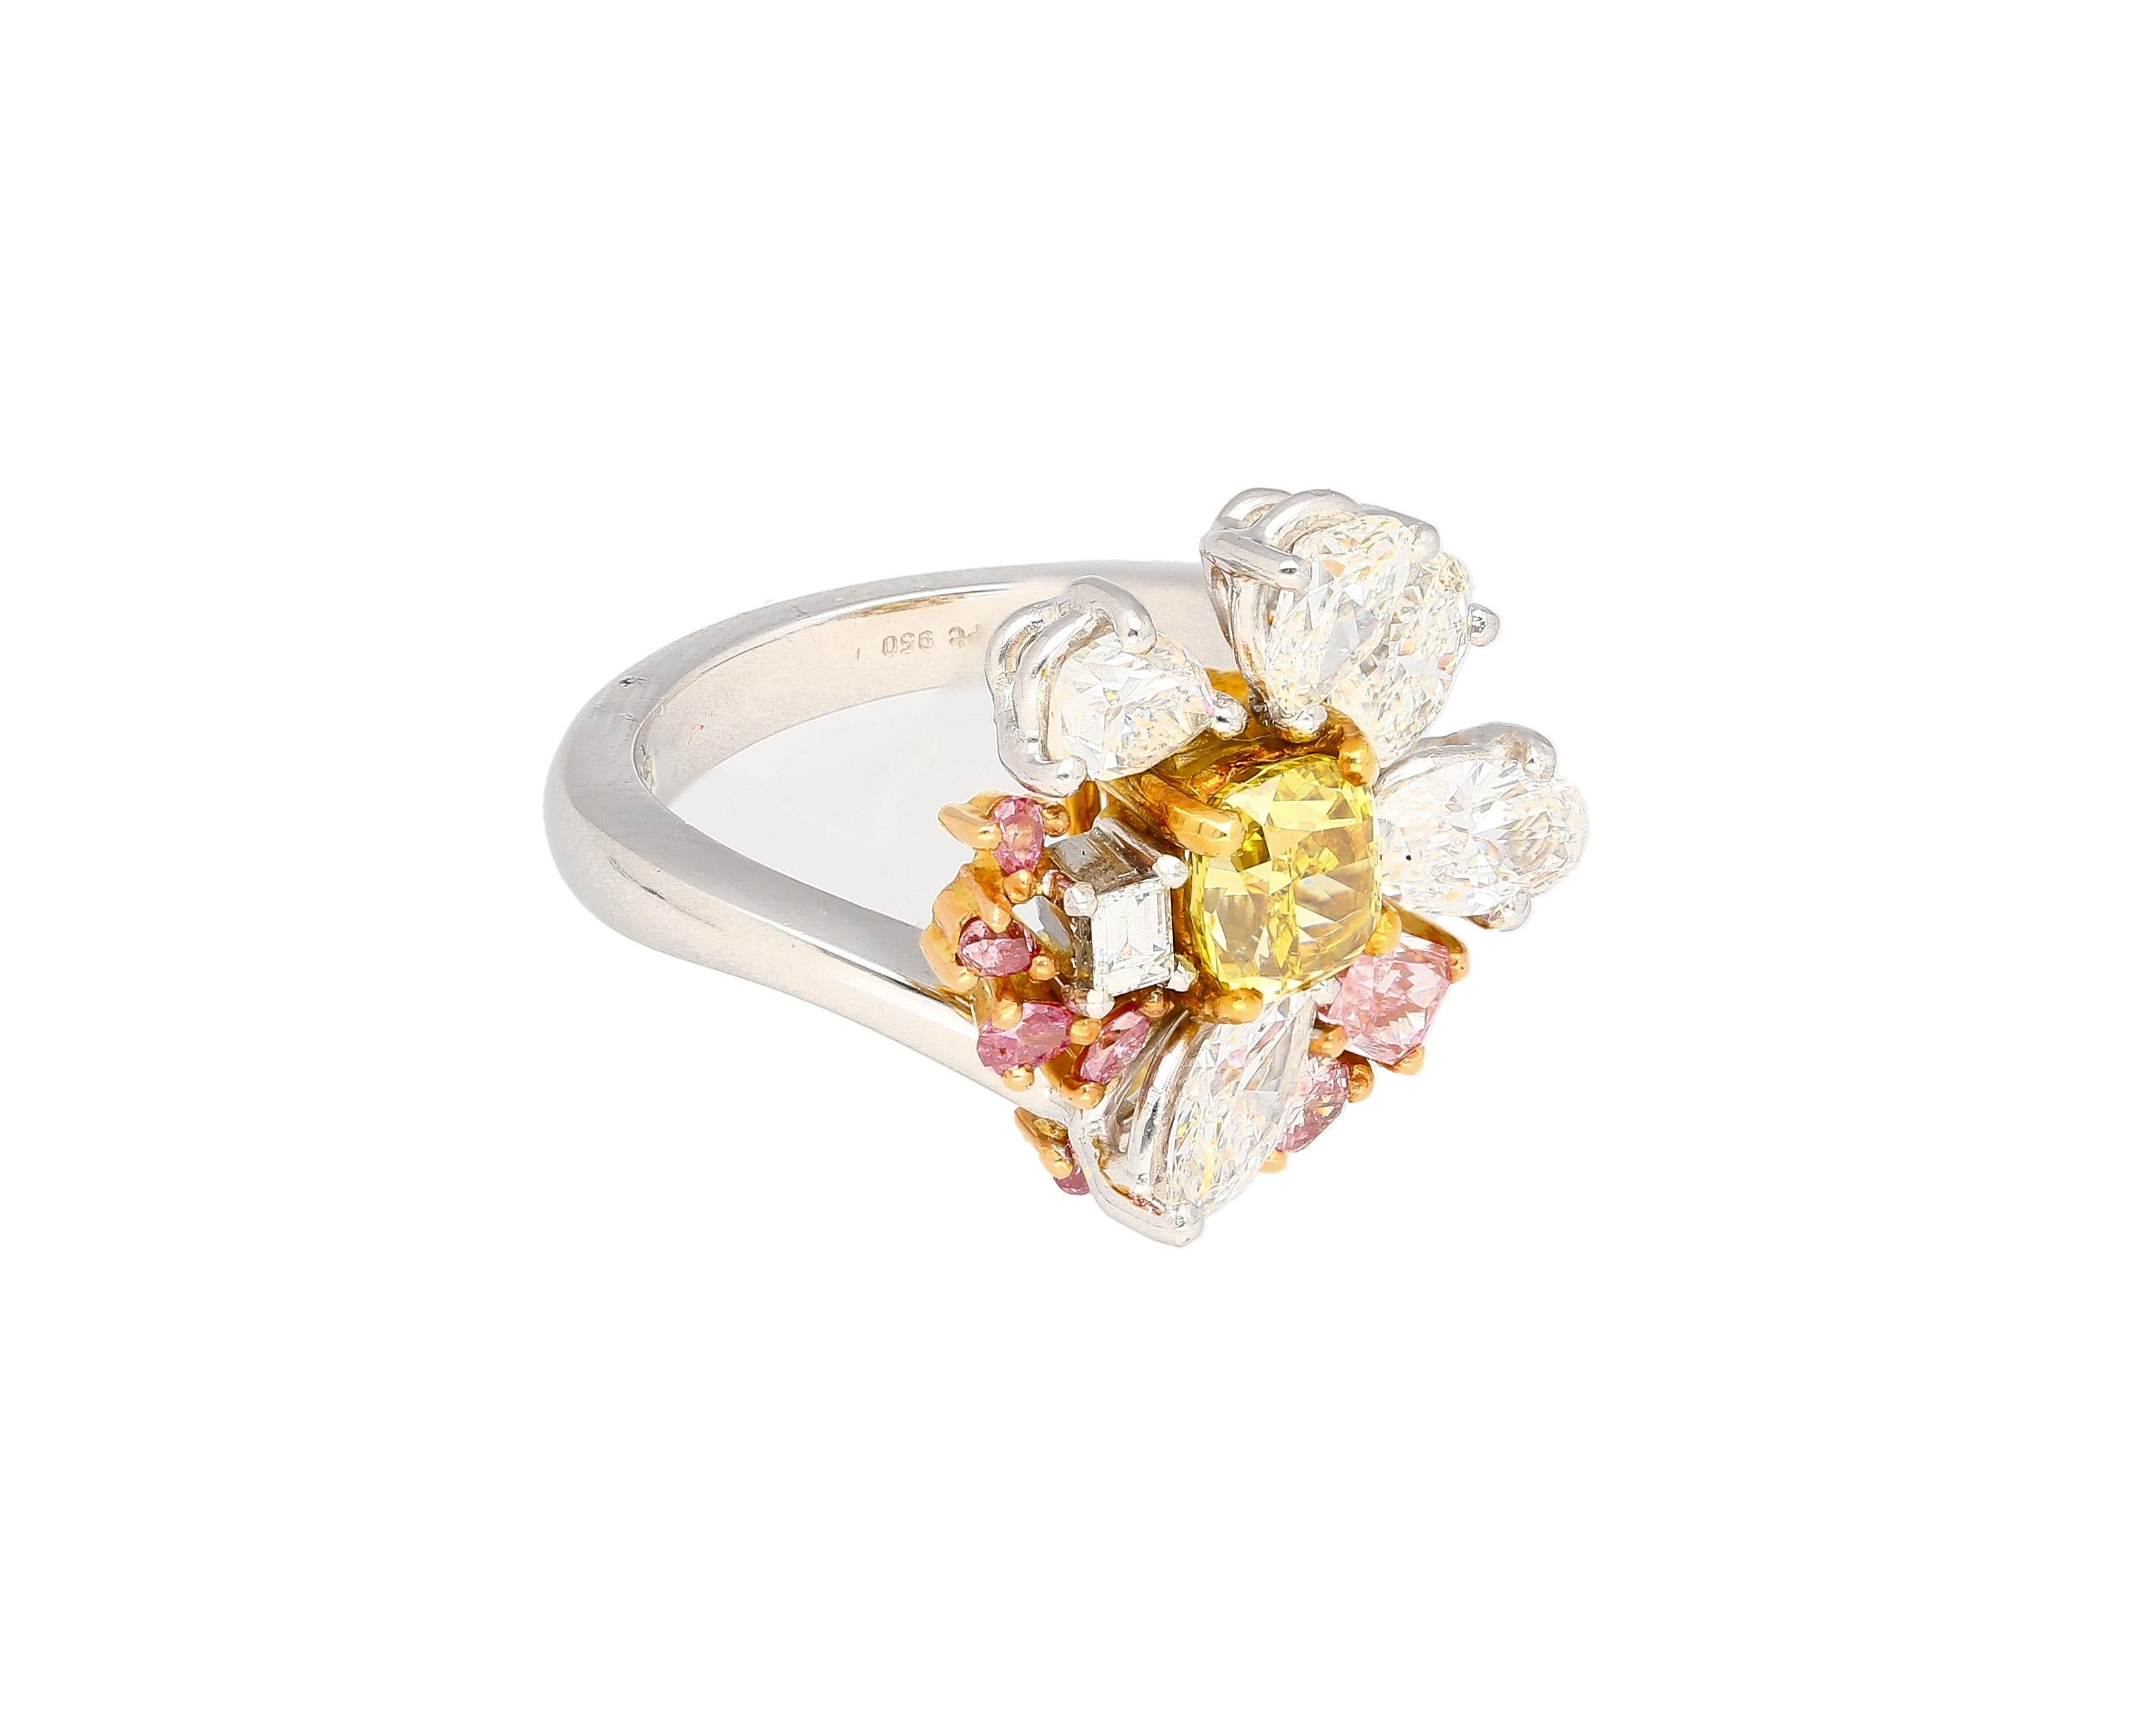 Art Deco GIA Certified Fancy Yellow, Pink and White Diamond Ring in Platinum 950 & 18K For Sale